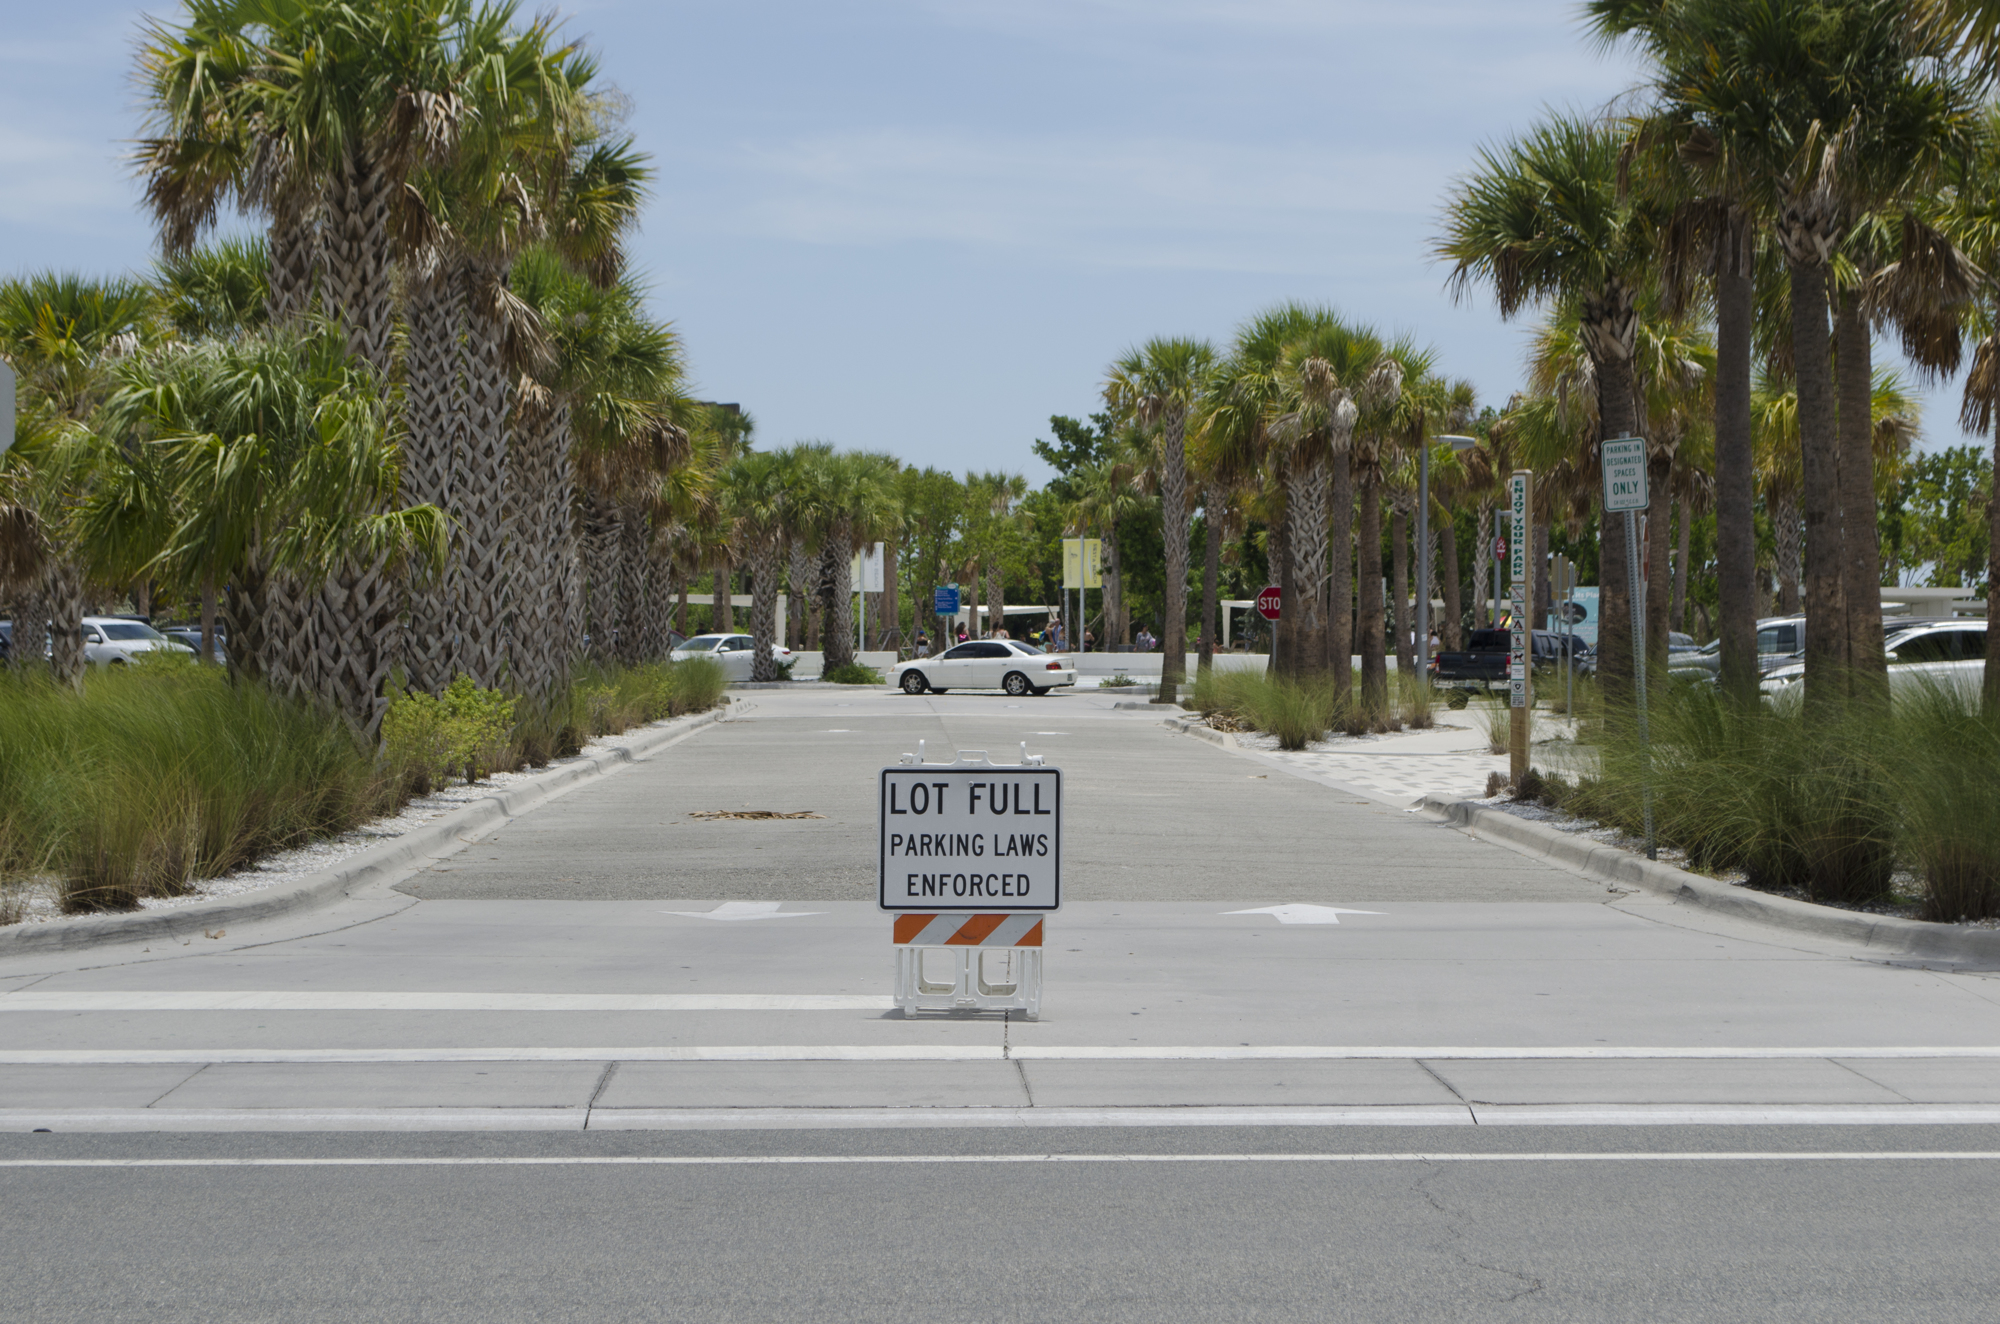 County staff believes paid parking could address crowding at the Siesta Key public beach parking lot.